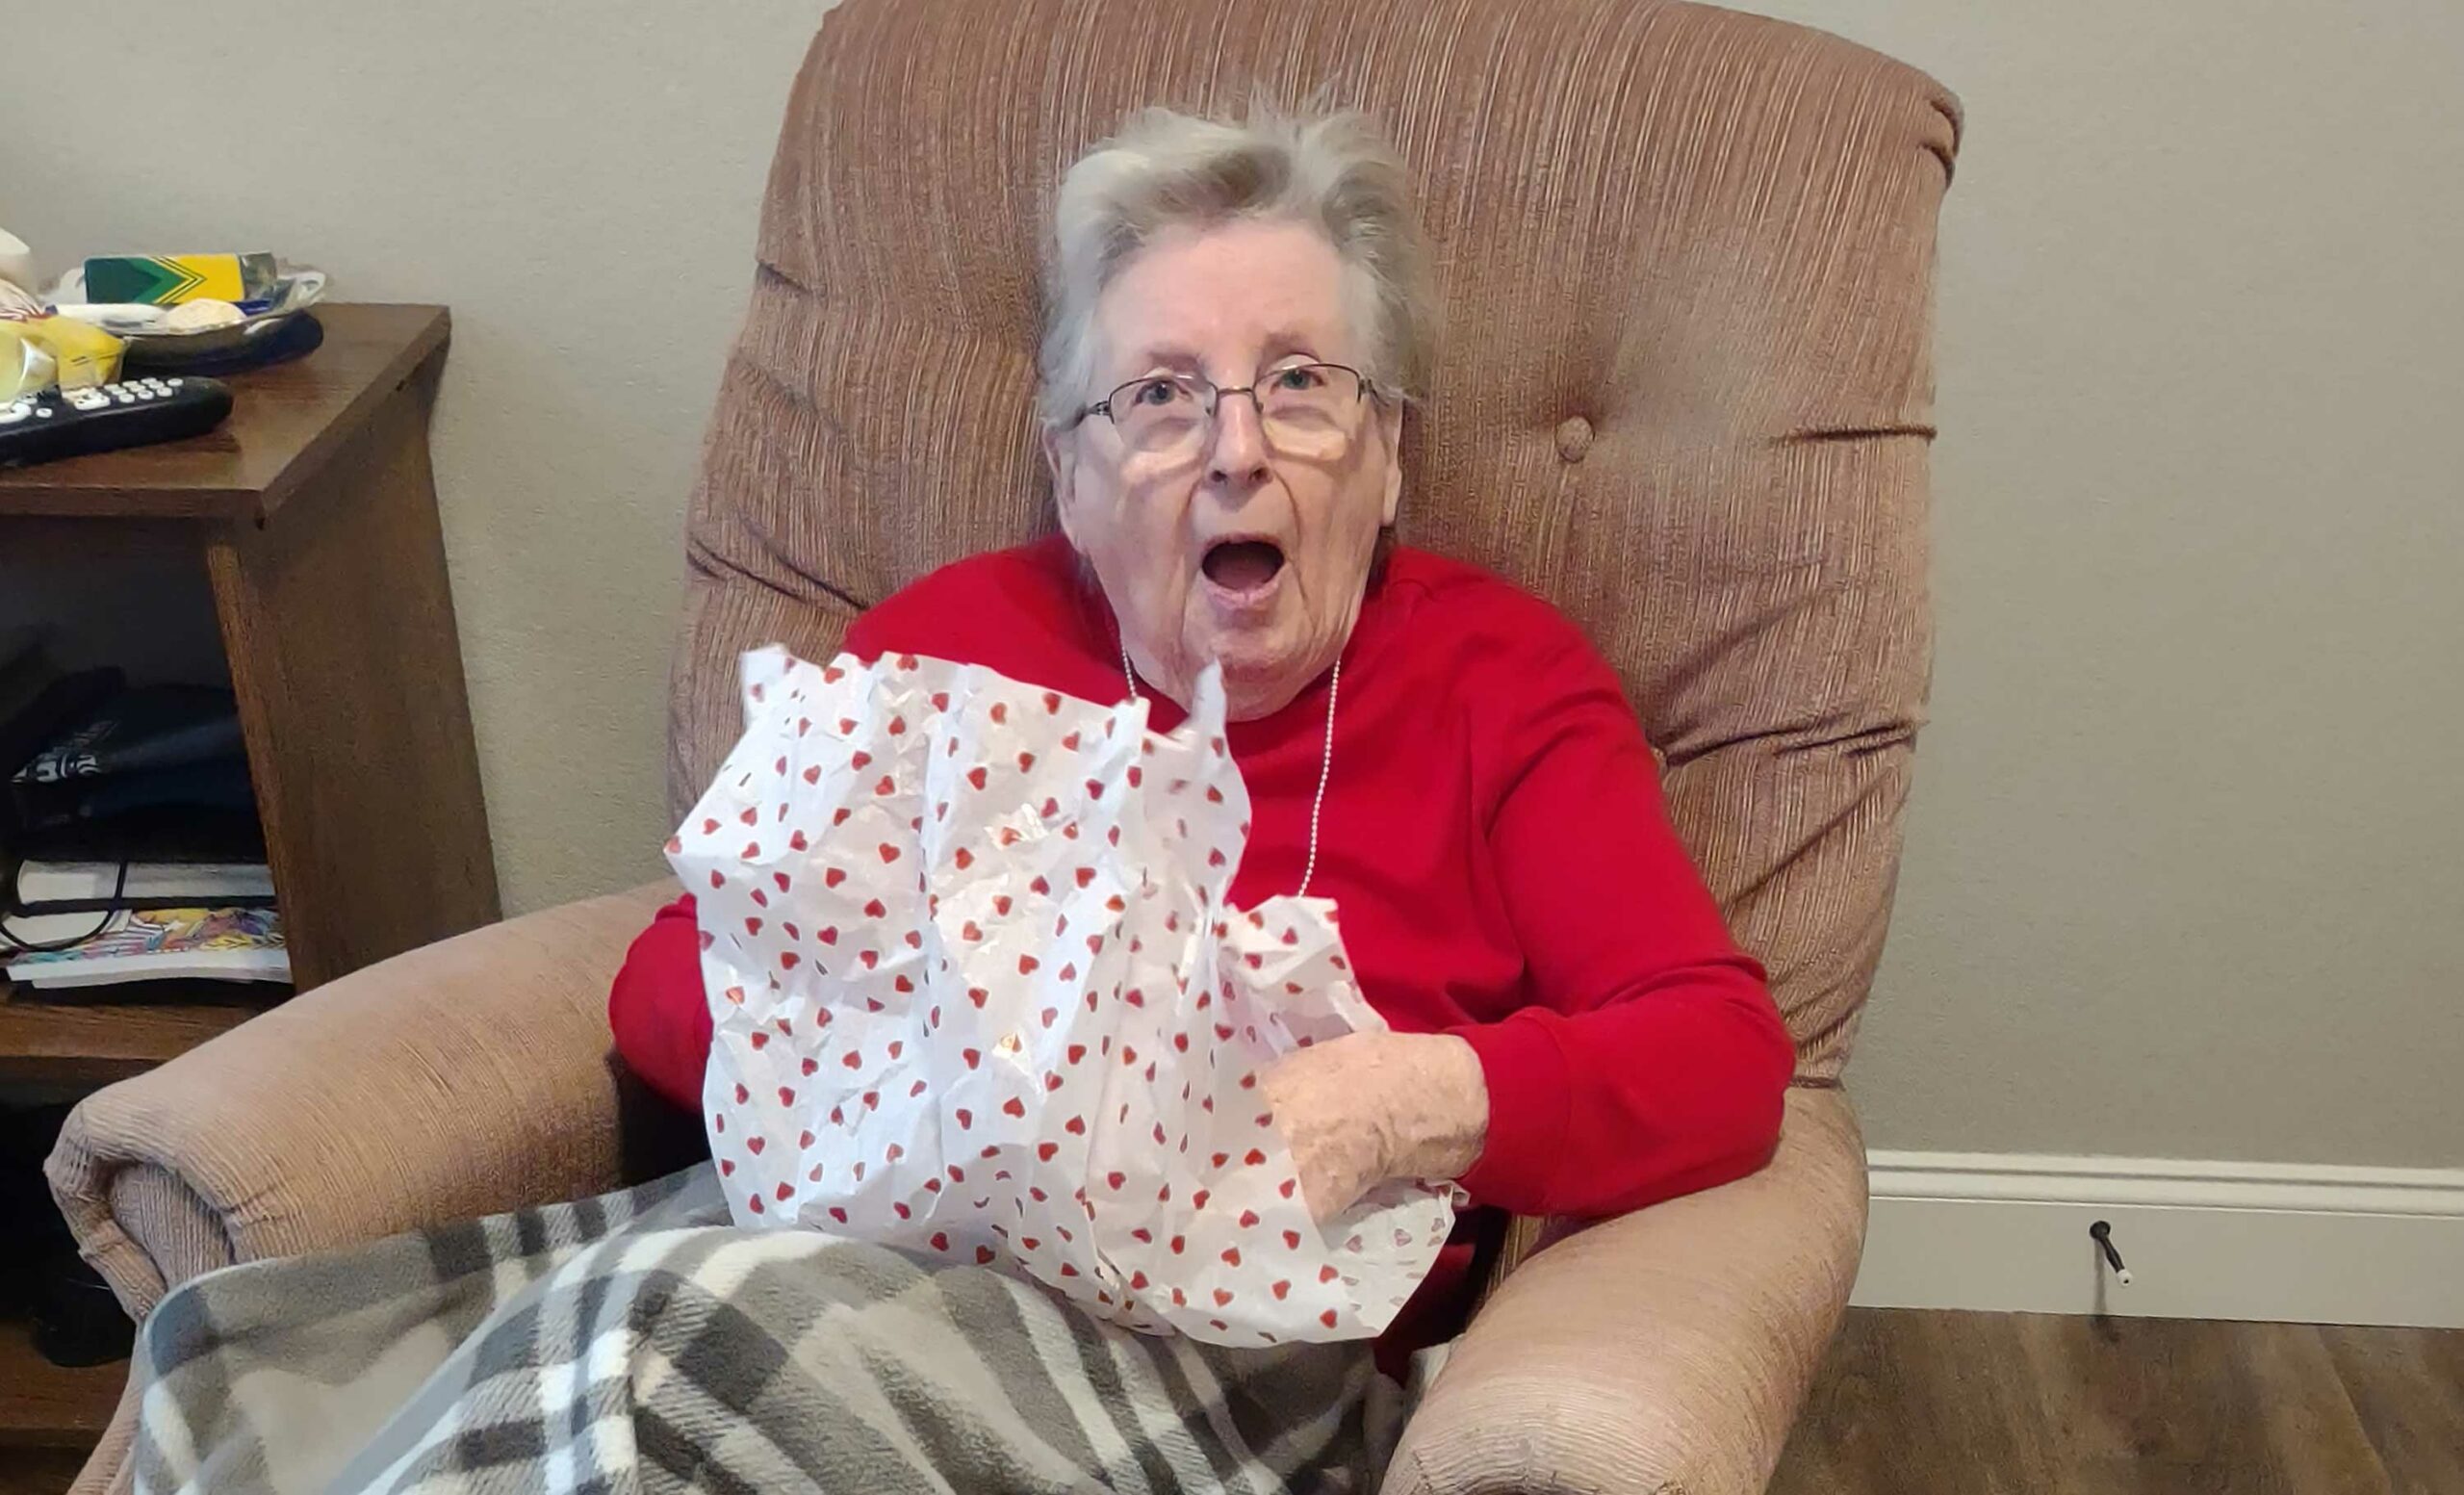 An elderly woman is sitting in a chair and holding a gift.